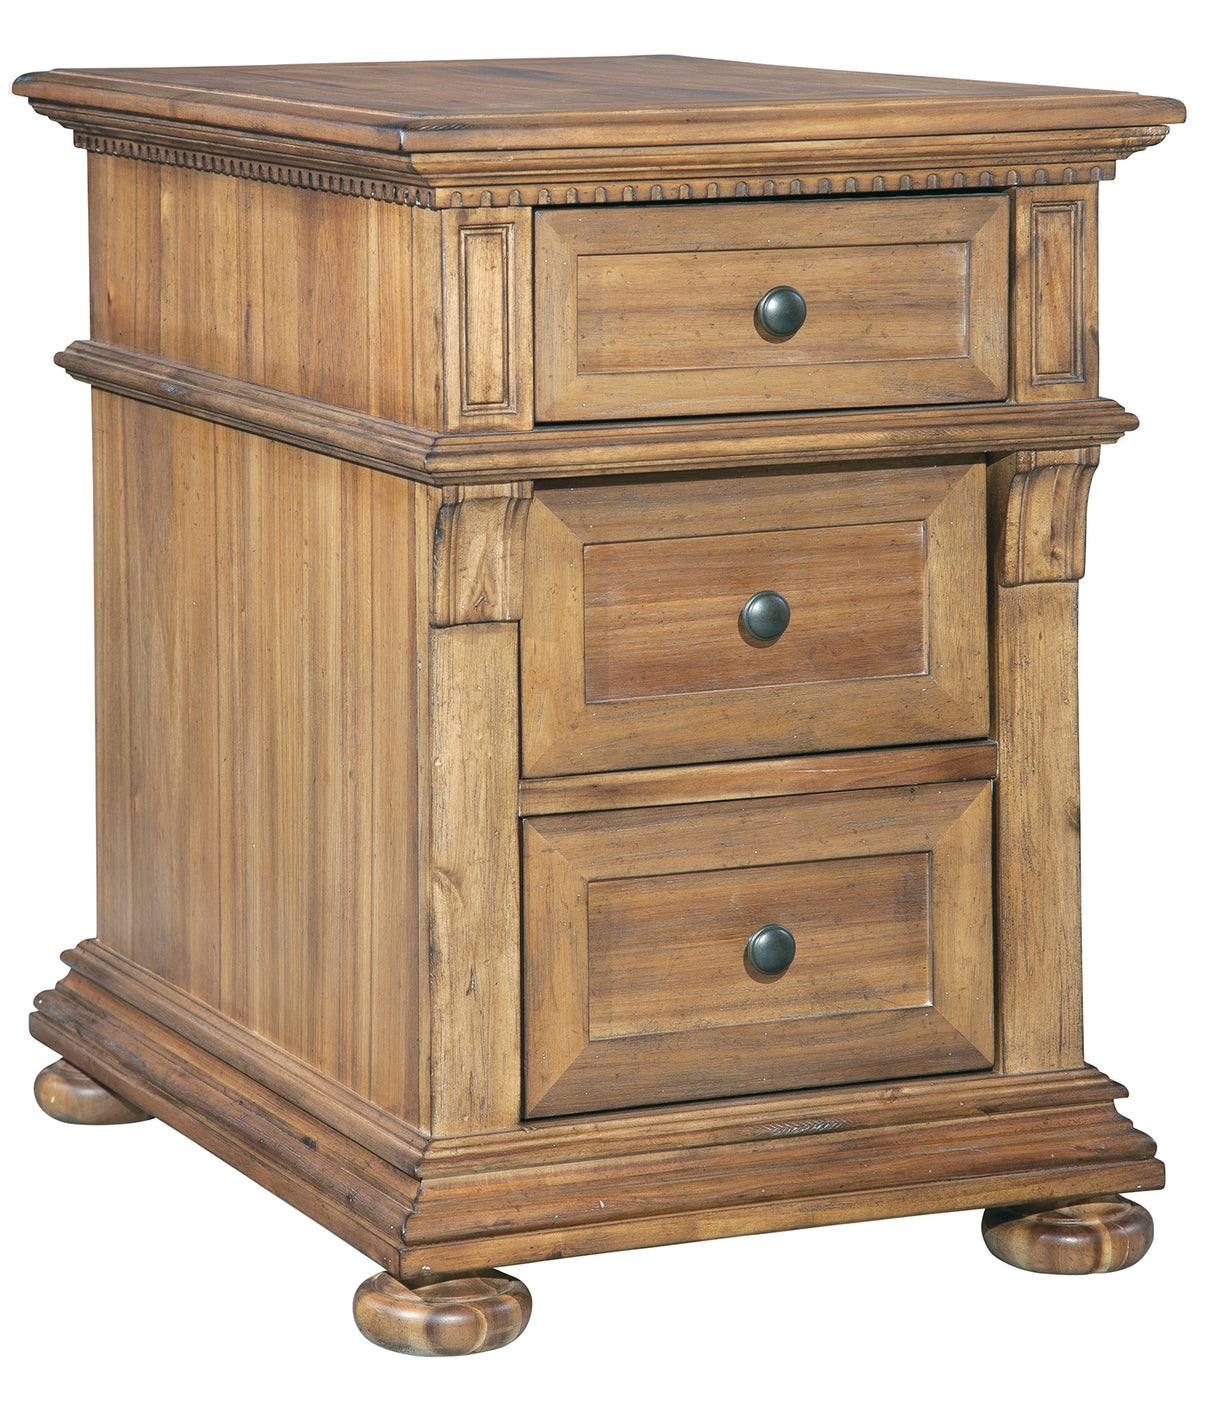 Hekman 23305 Wellington Hall 18in. x 26in. x 26.5in. Chairside Chest